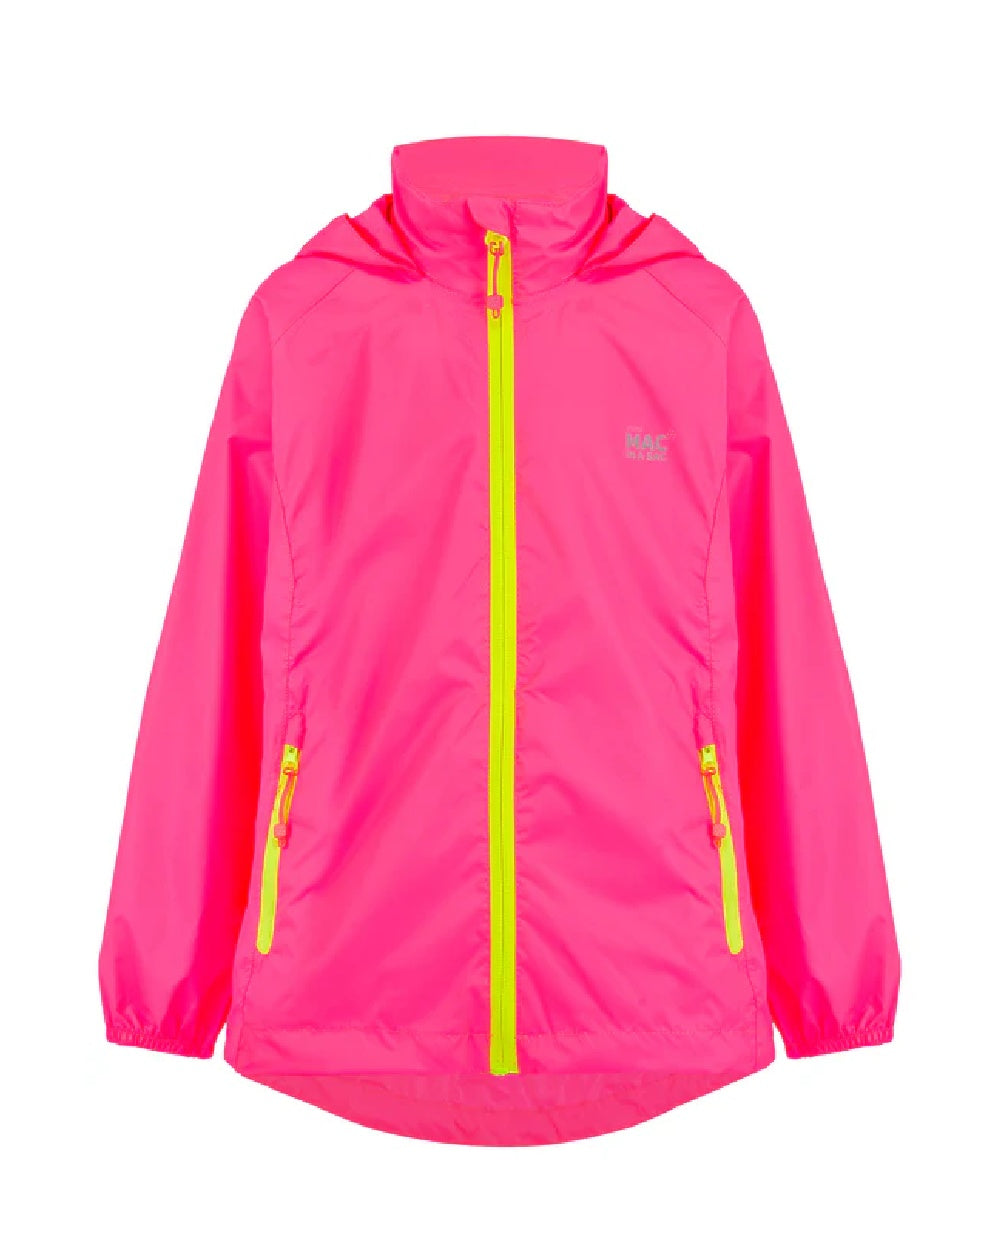 Neon Pink coloured Mac In A Sac Origin Childrens Mini Packable Waterproof Jacket on white background 